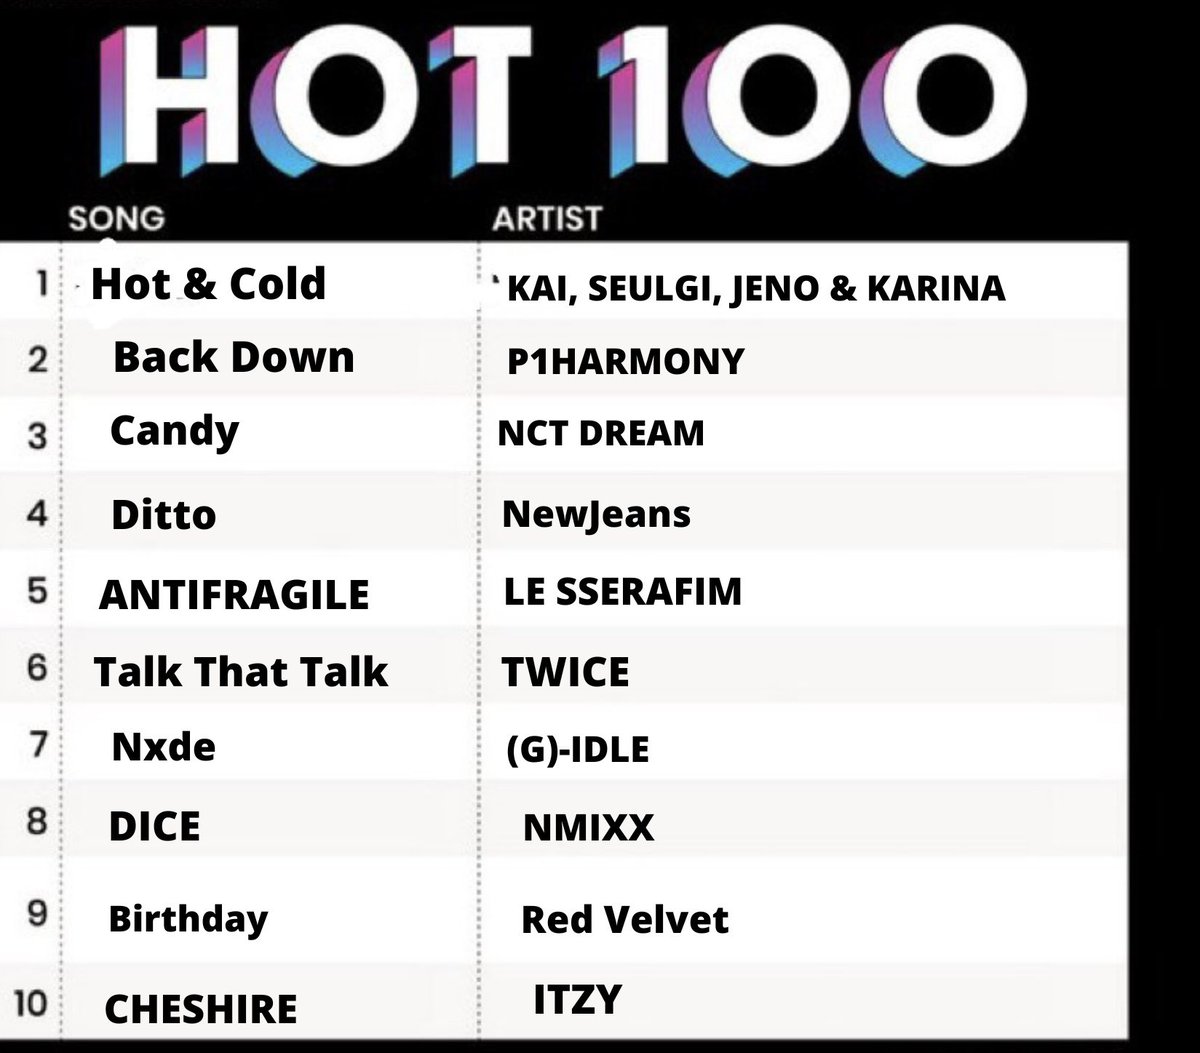 #HotAndCold by #SEULGI of @RVsmtown , #KAI of @weareoneEXO, #KARINA of @aespa_official & #JENO of @NCTsmtown reaches the #1 spot on the ABC KPOP Hot  100 Chart this week. This would become #SEULGI’s 2nd #1 Single. While this becomes #KAI’s #KARINA & #JENO’s first Top #1 Single